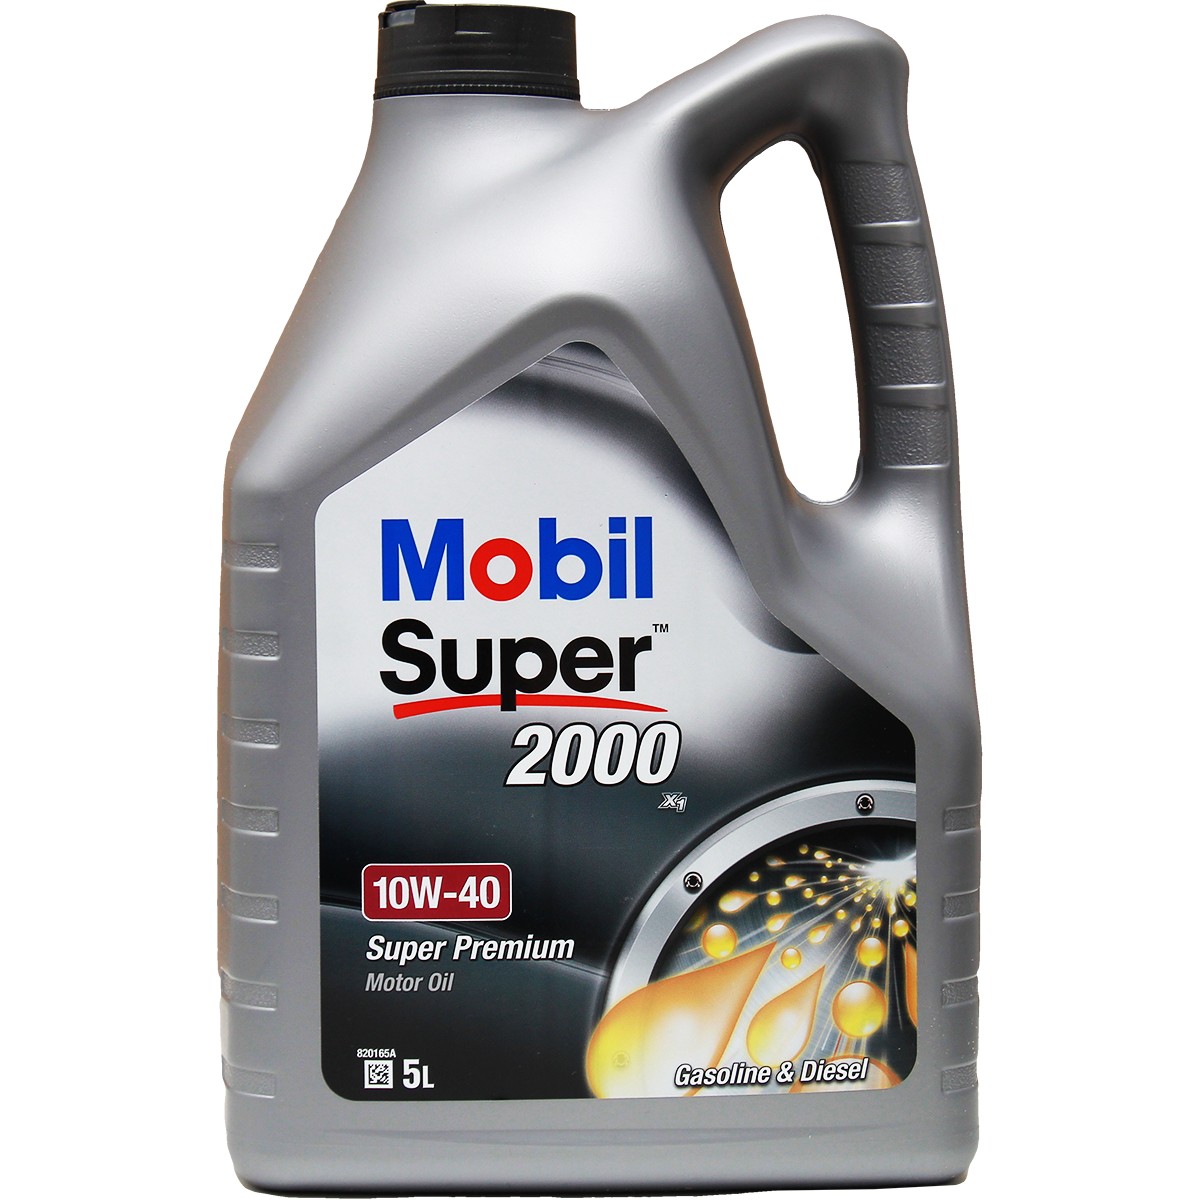 Great value for money - MOBIL Engine oil 150563